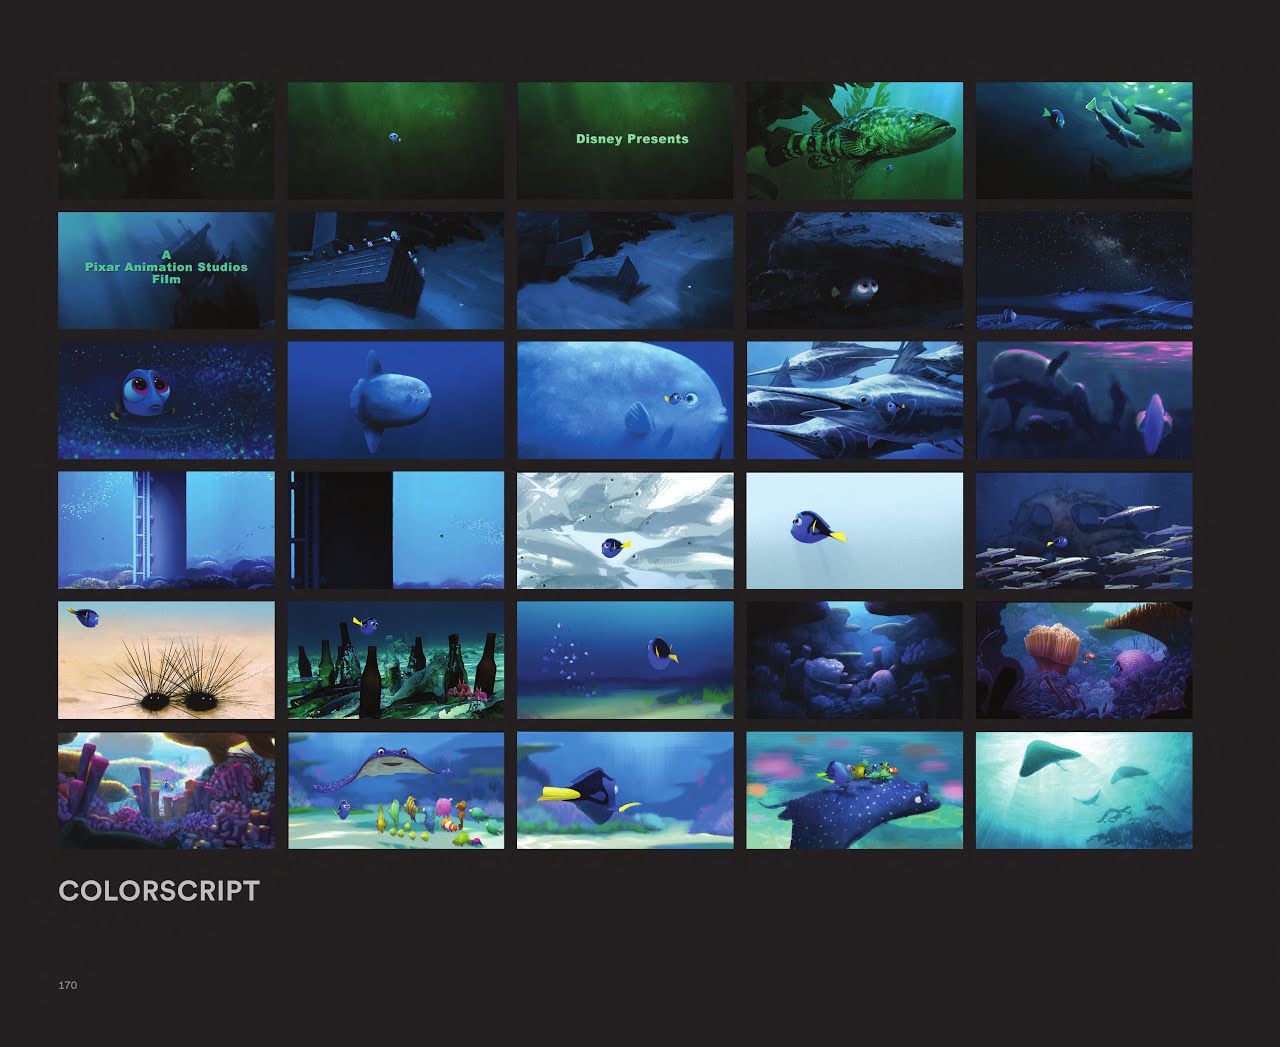 The Art of Finding Dory 171